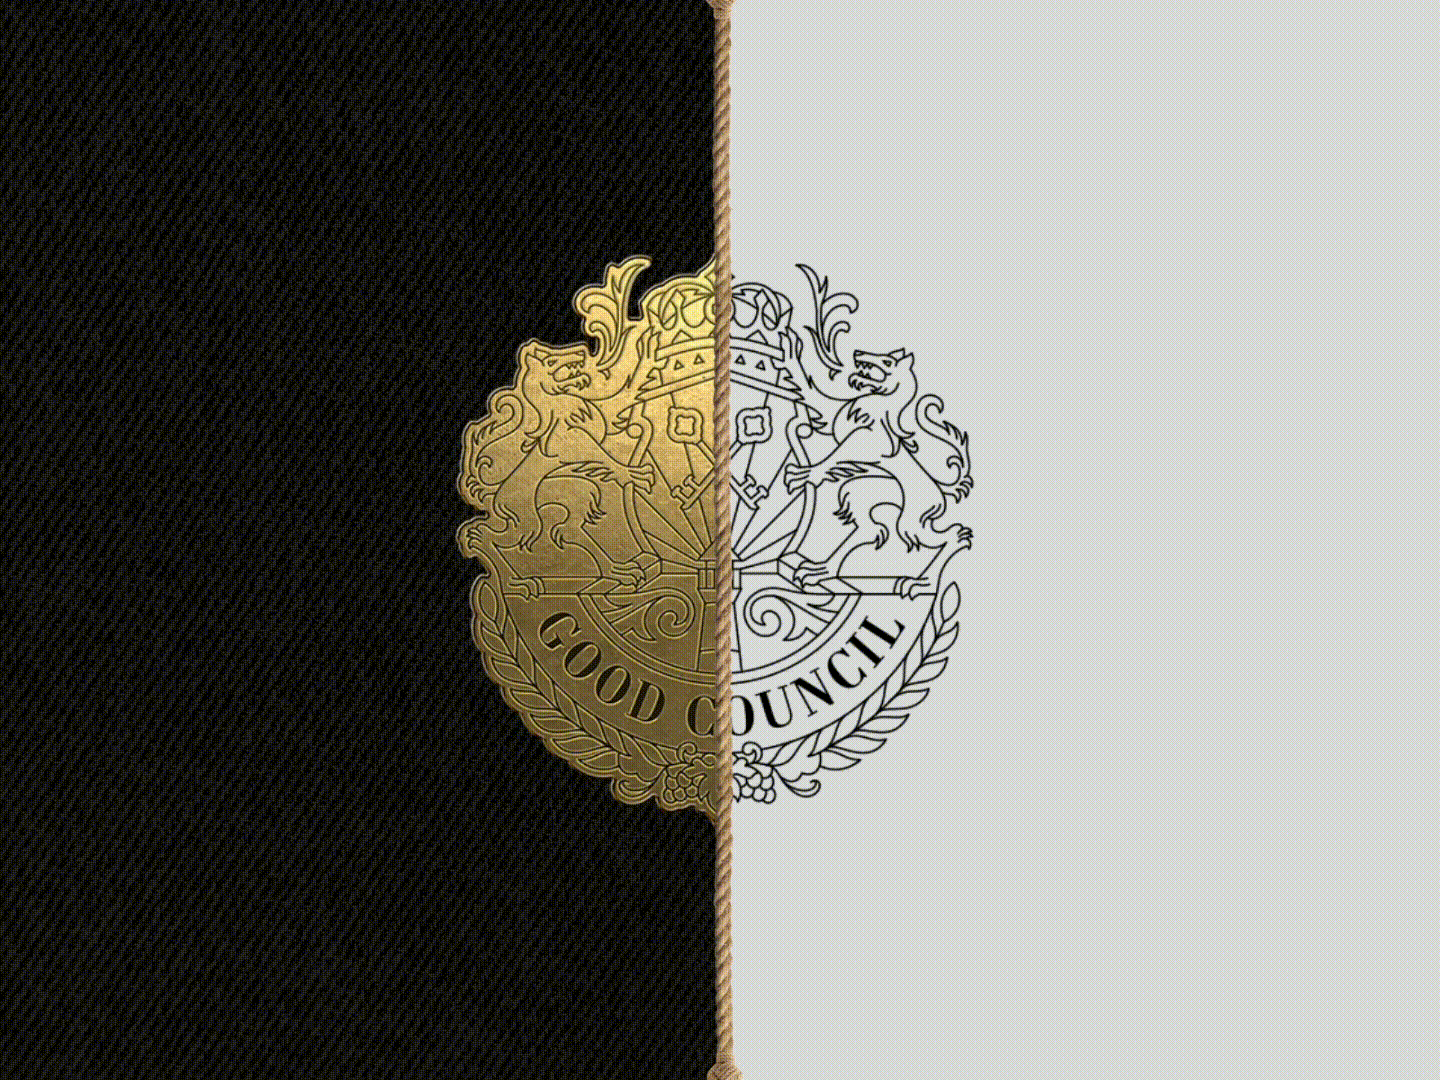 Good Council - Branding Full Preview brand identity branding coaching coat of arms consultant crest crown family crest gold hotel illustration key king line lineart logo luxury modern monoline wolf